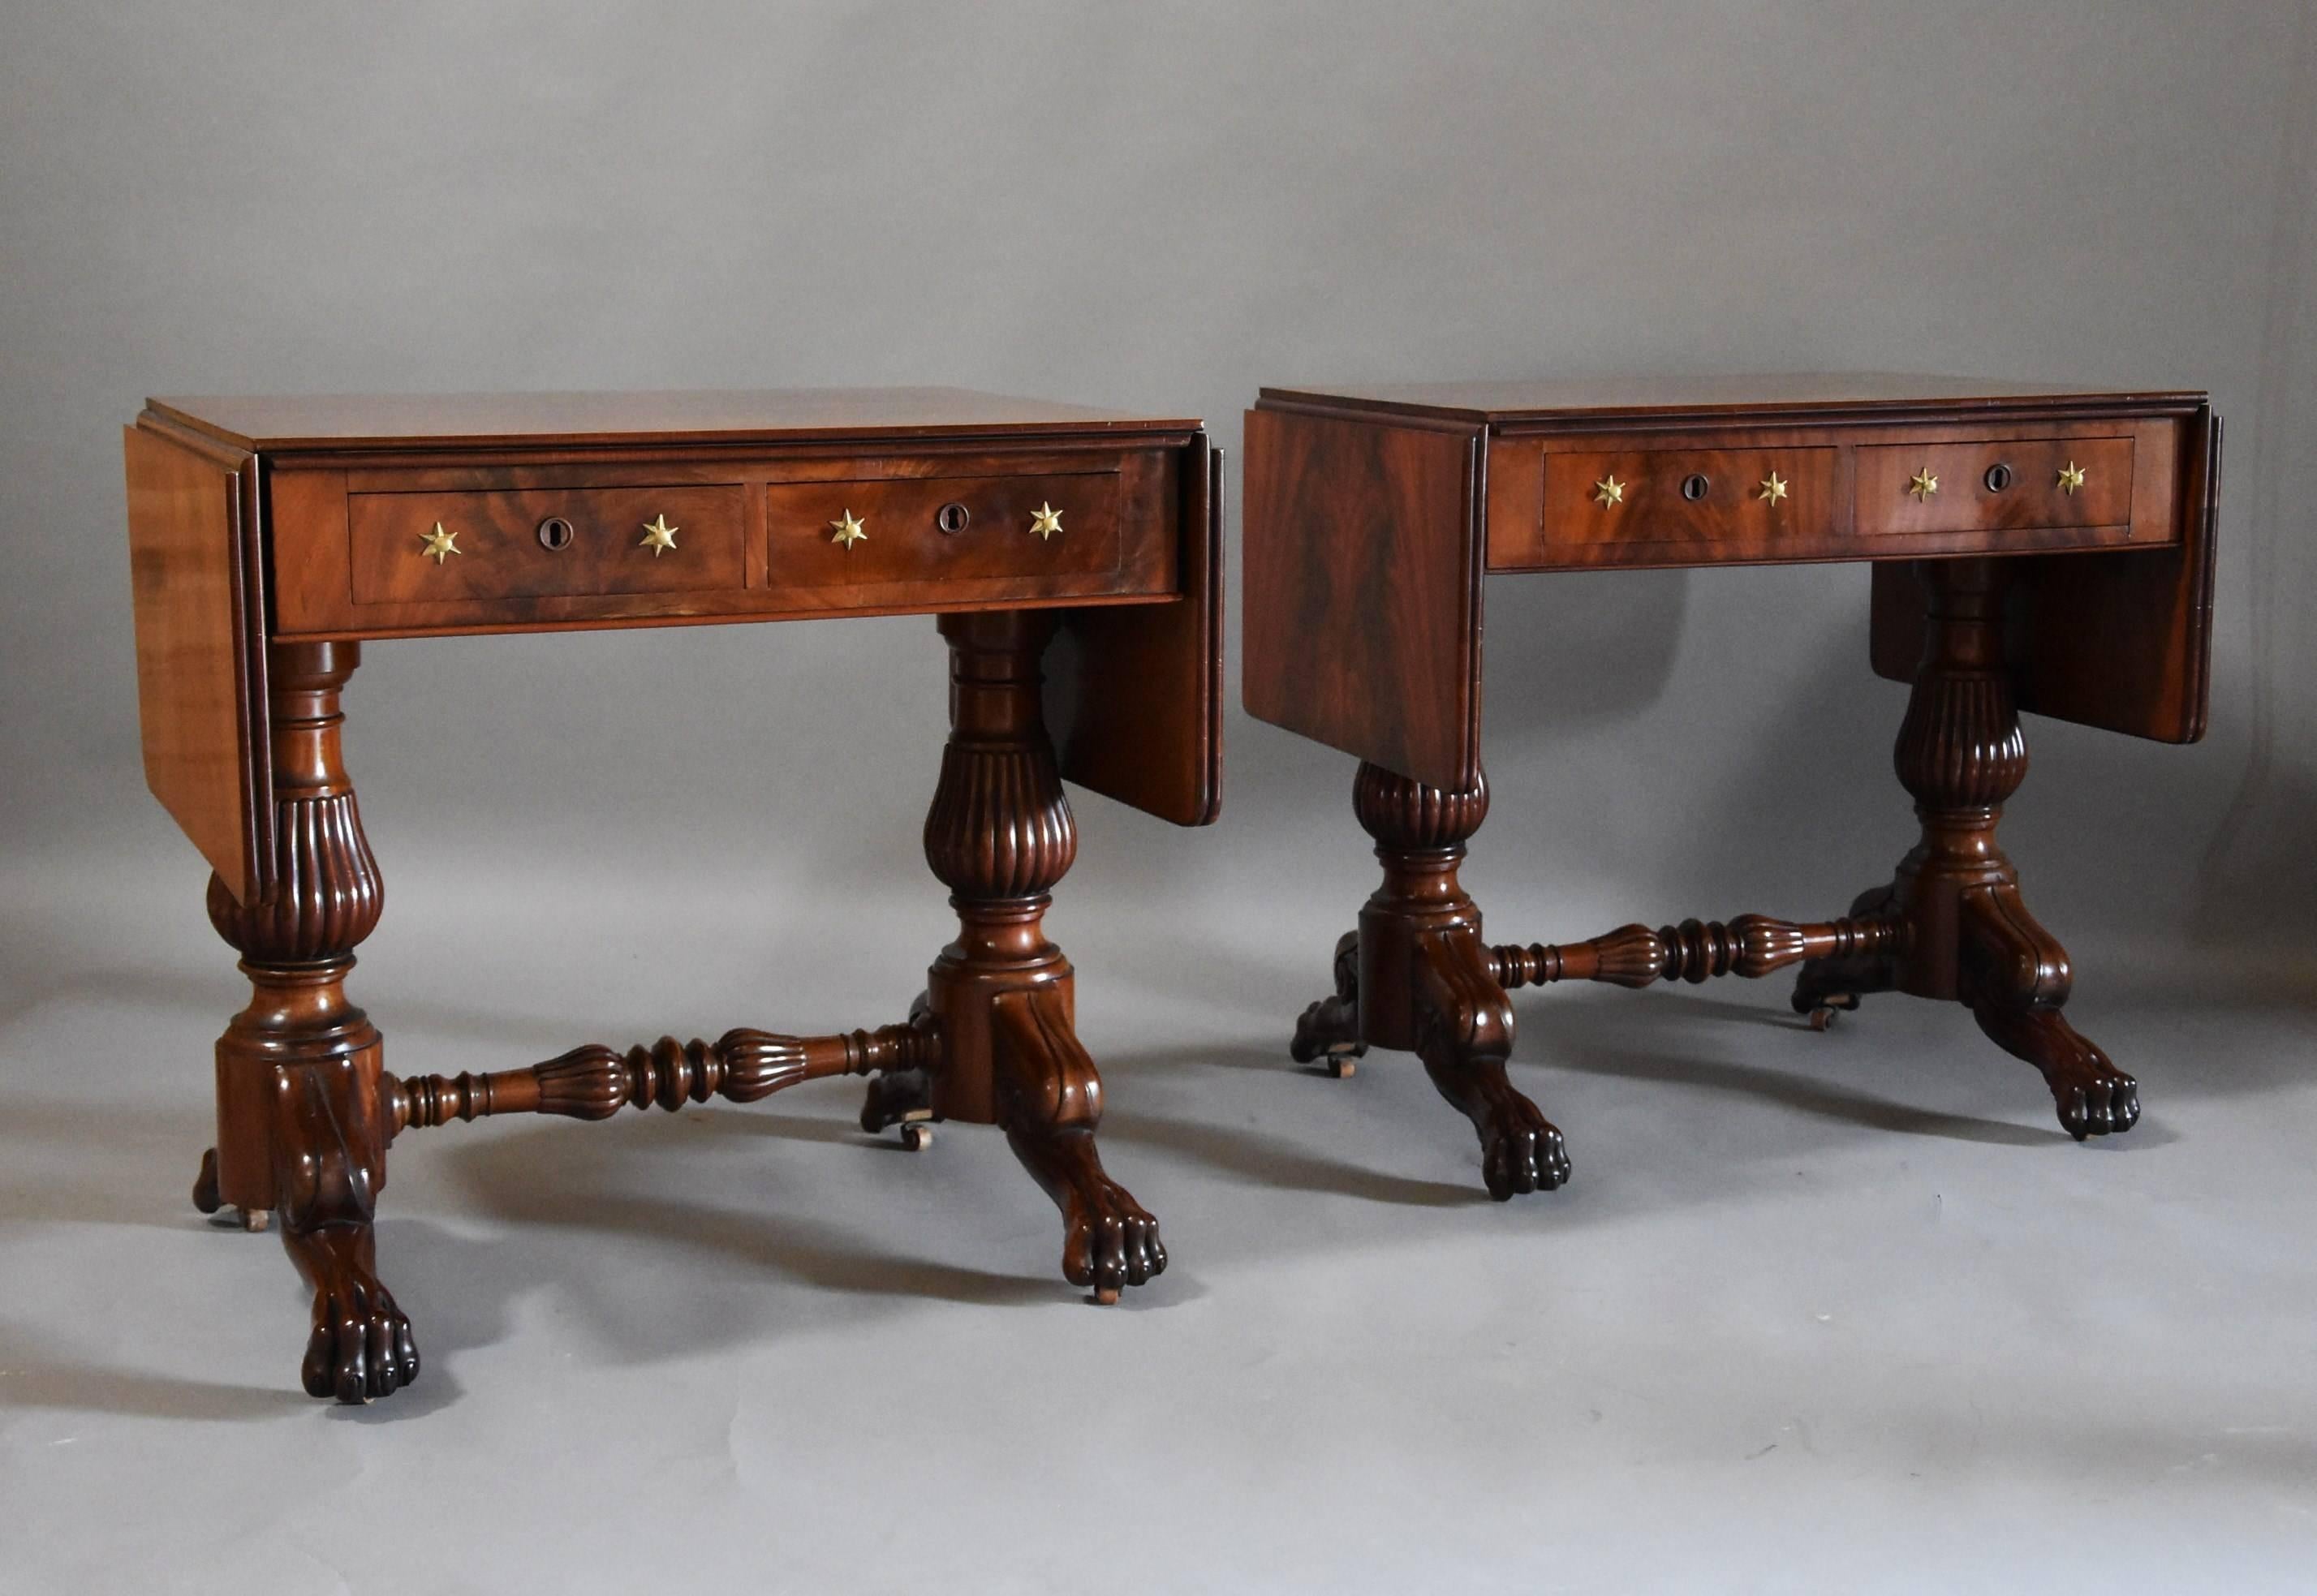 A superb pair of mid-19th century French mahogany sofa tables made from superb quality materials of desirable size.

The tops and leaves consist of superb curl mahogany mirror veneers with a moulded edge, the top having evidence of slight movement